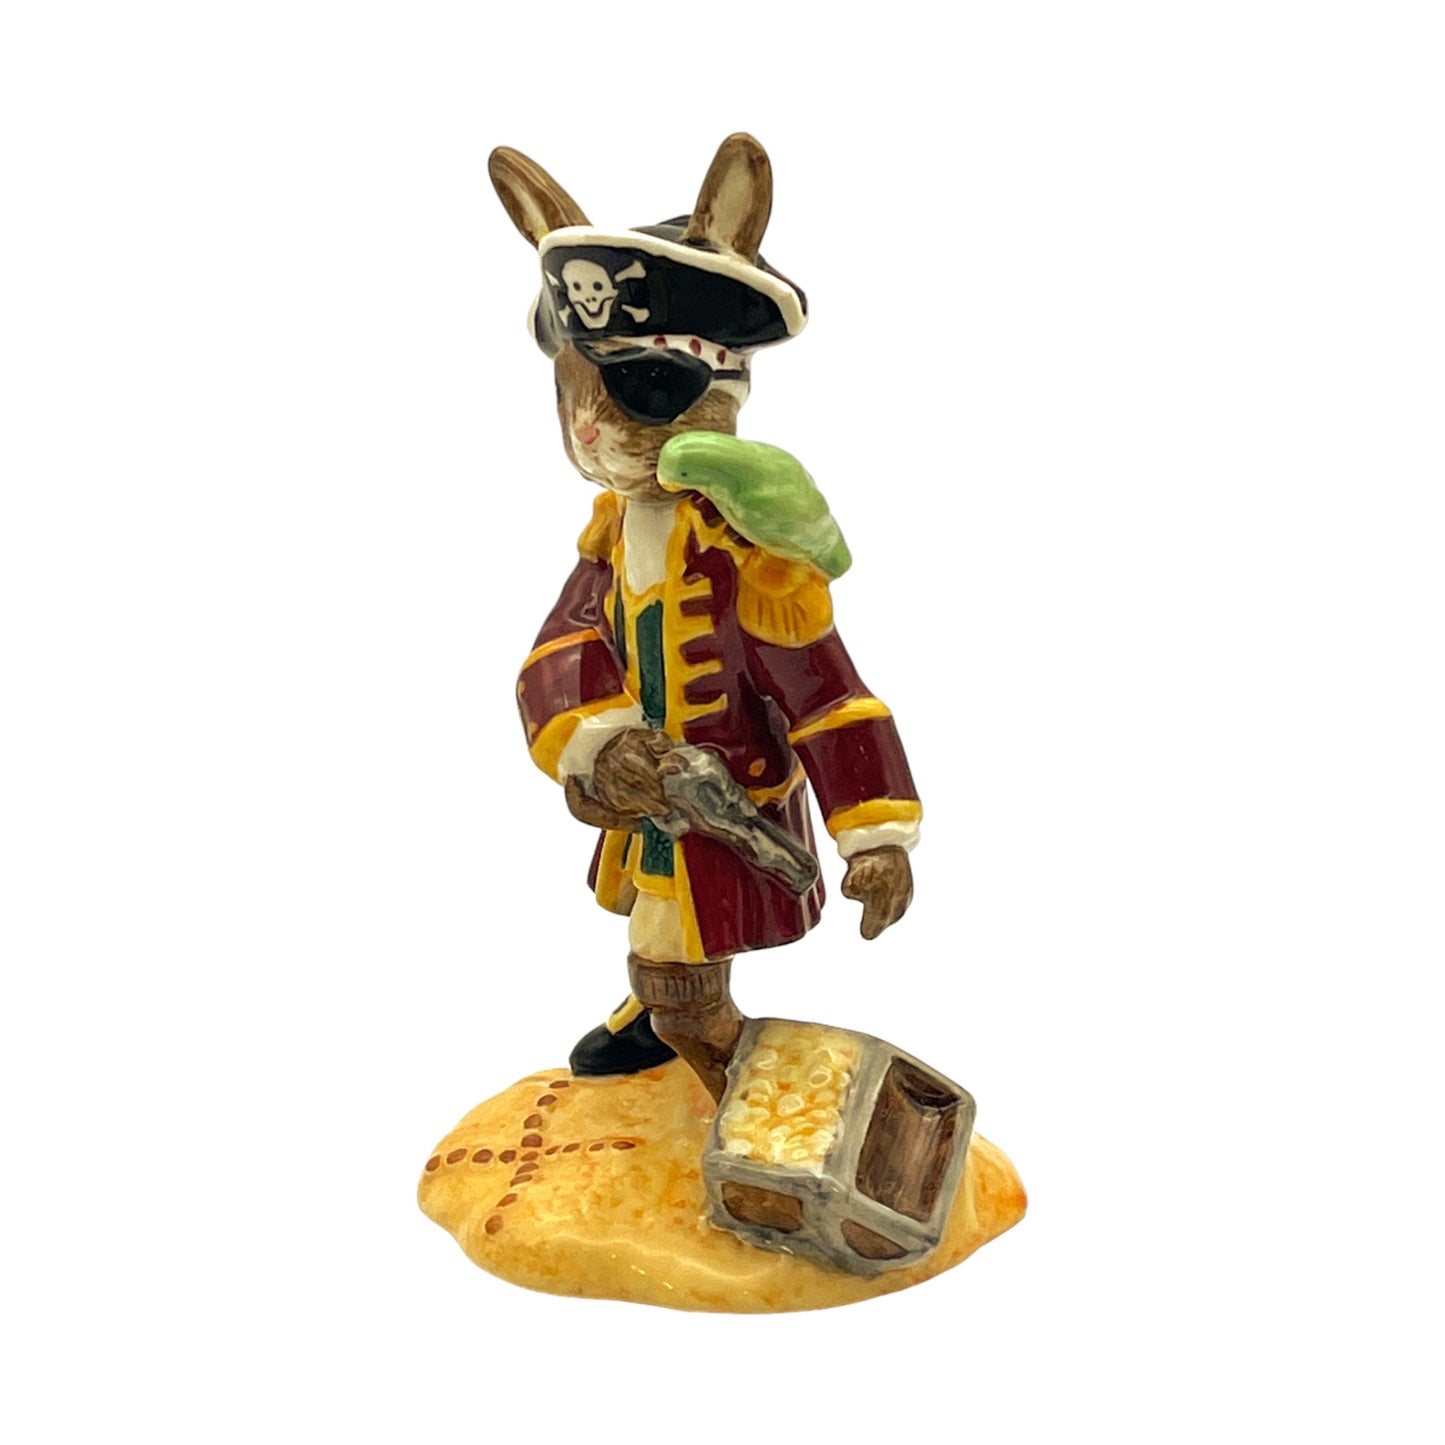 Royal Doulton Bunnykins - The Shipmates Collection Pirate - Hand Made & Decorated - 2003  - 5"